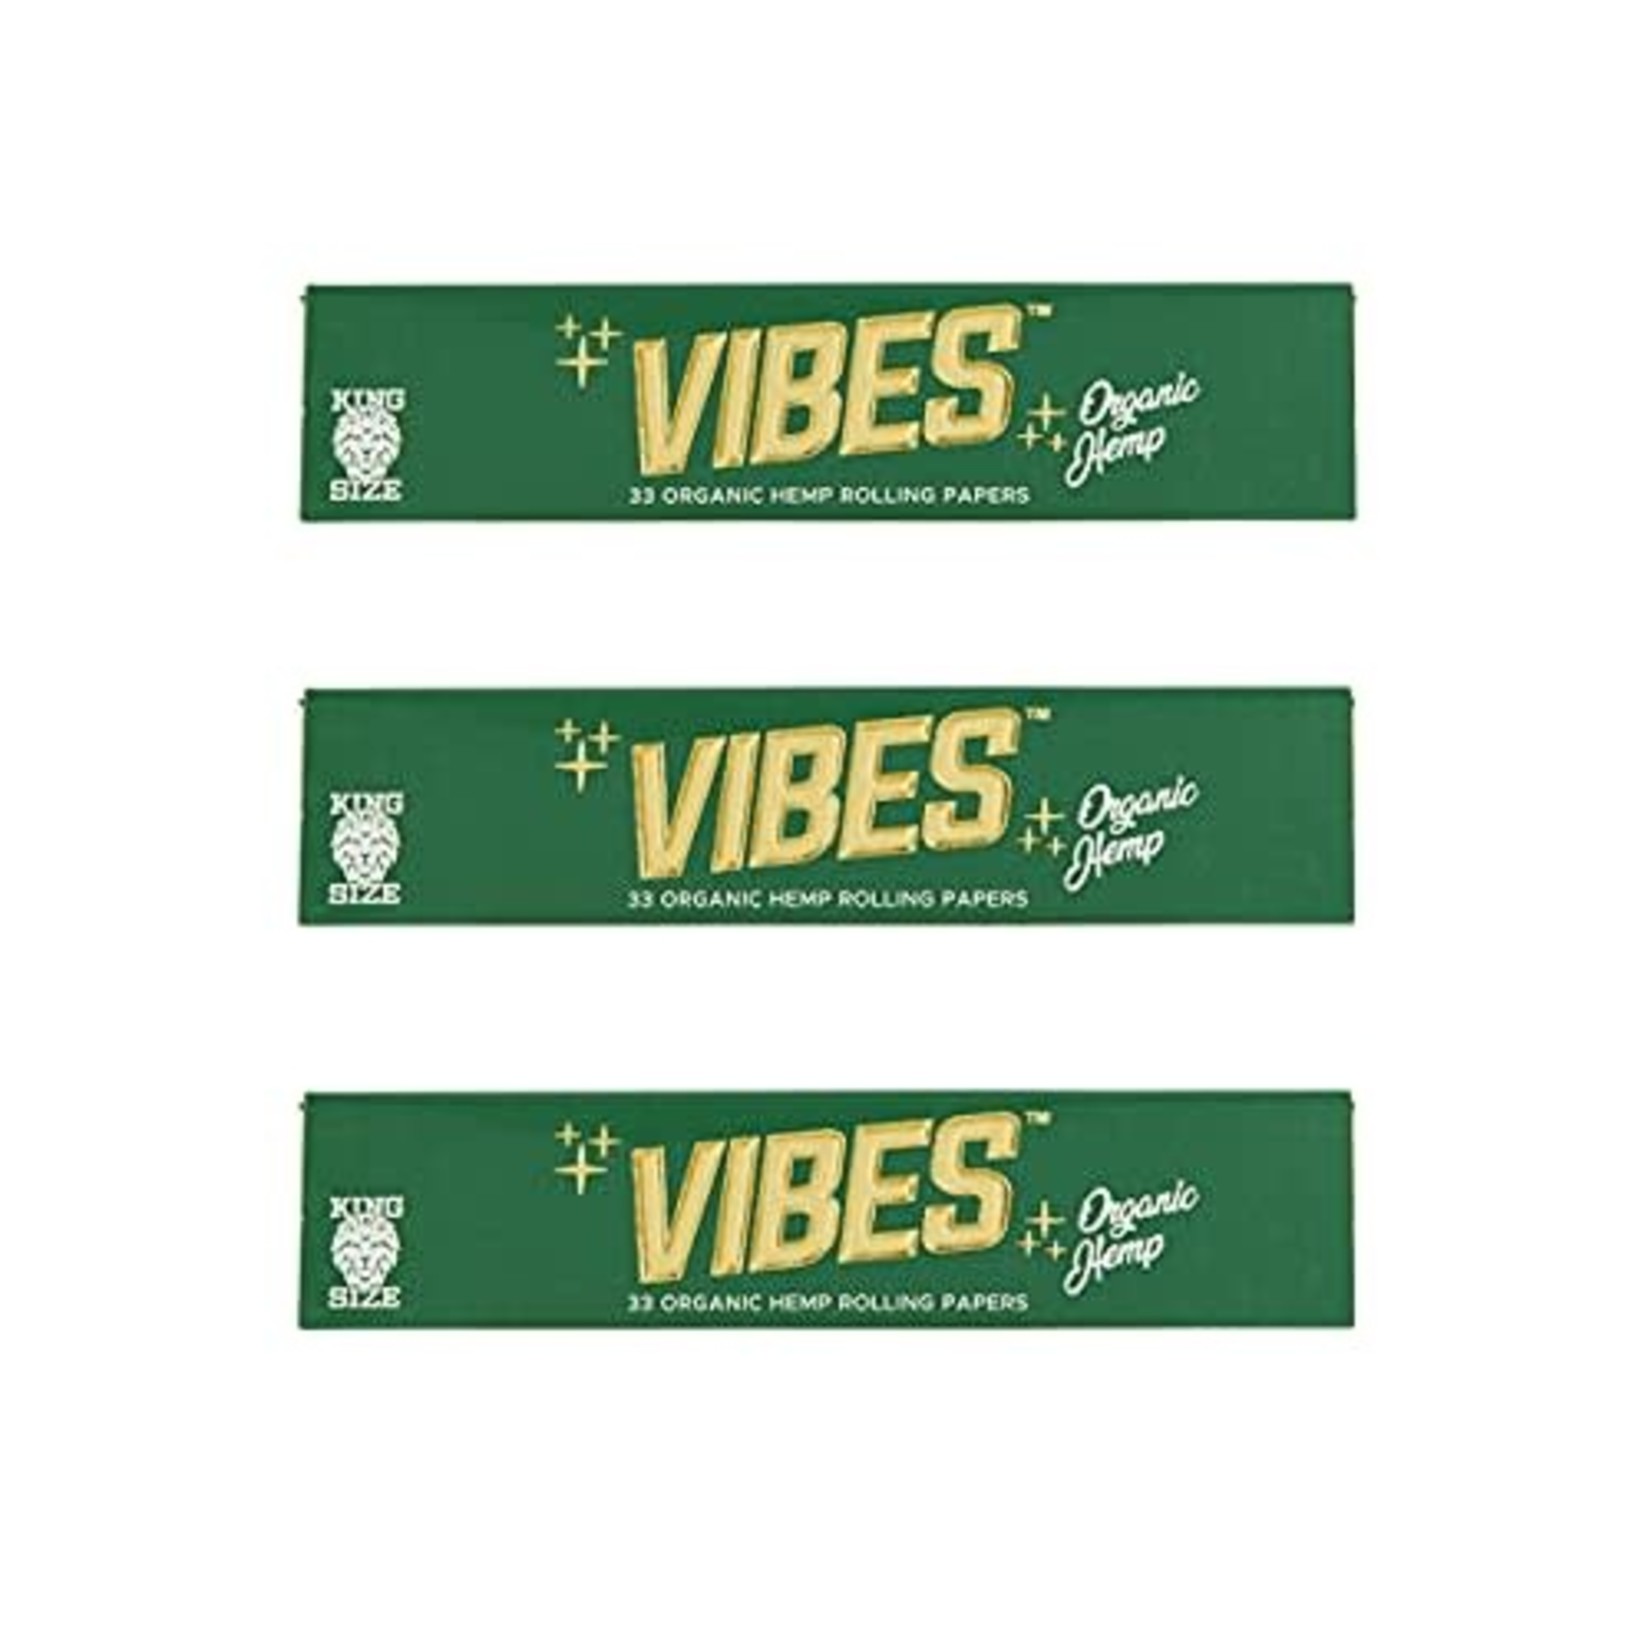 VIBES VIBES King Size Slim Rolling Papers